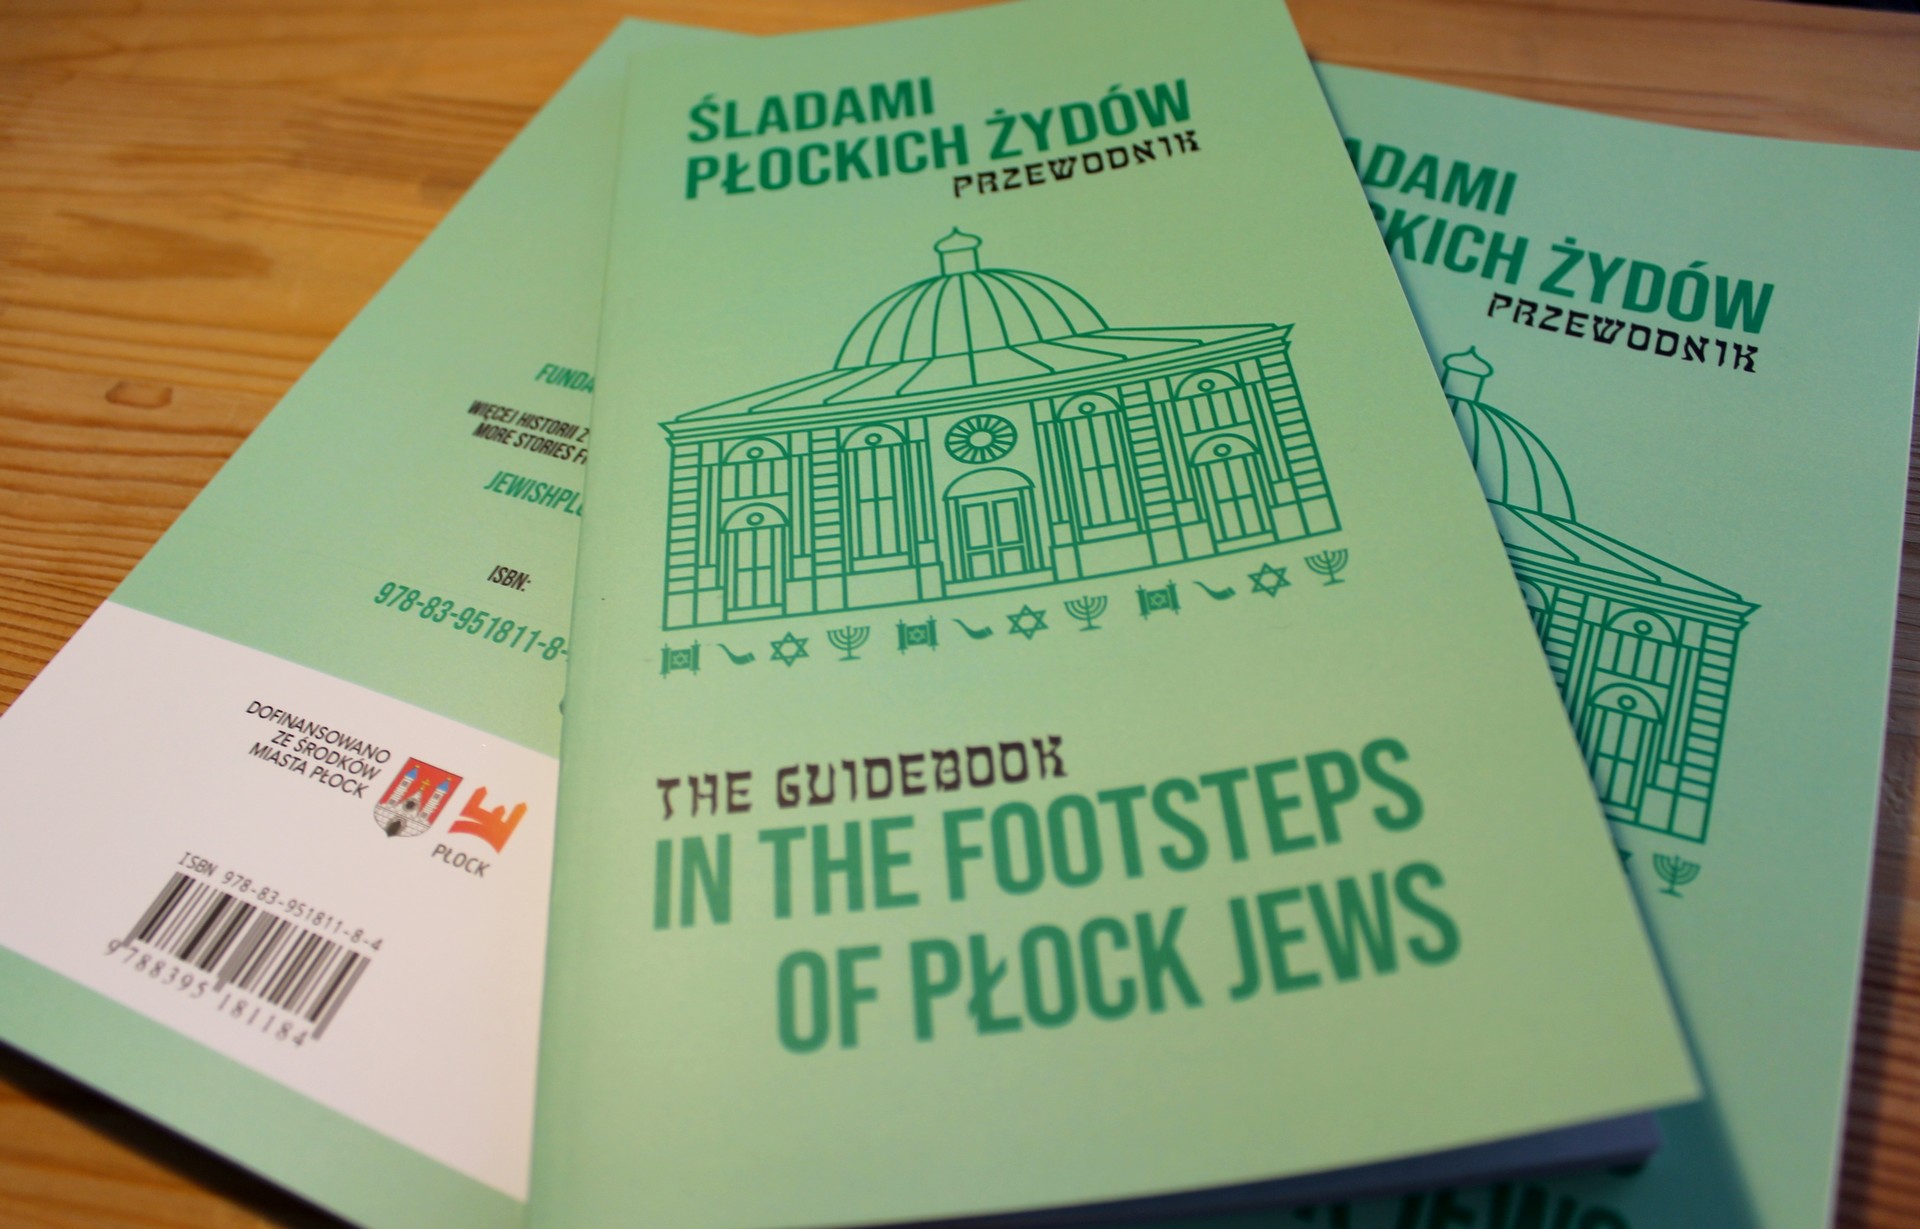 New edition of the guidebook “In the footsteps of Płock Jews” available from 28 August